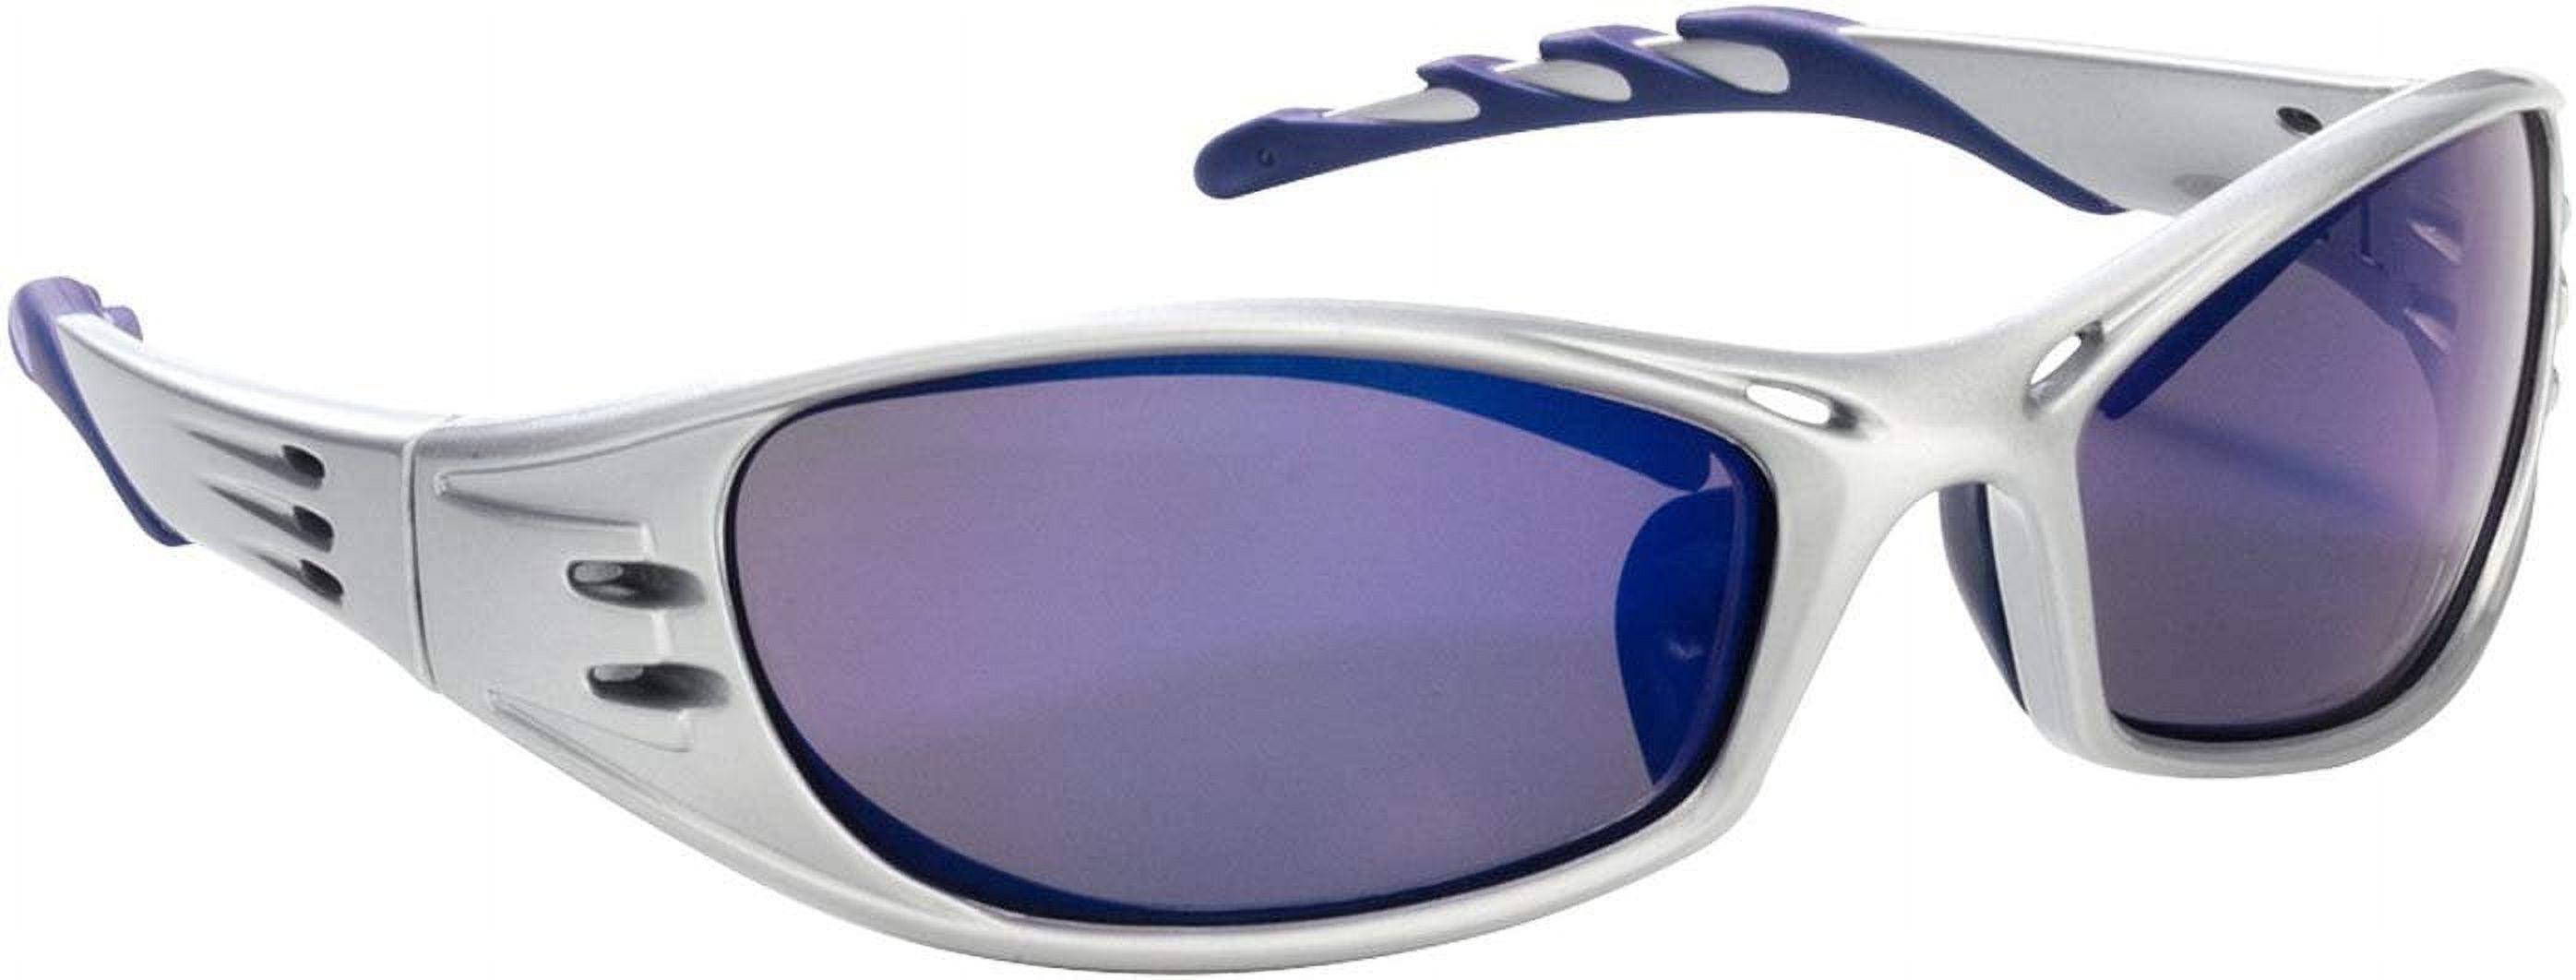 3M 90988 Fuel High-Performance Safety Glasses with Platinum Frame and Purple Mirror Lens - image 1 of 4